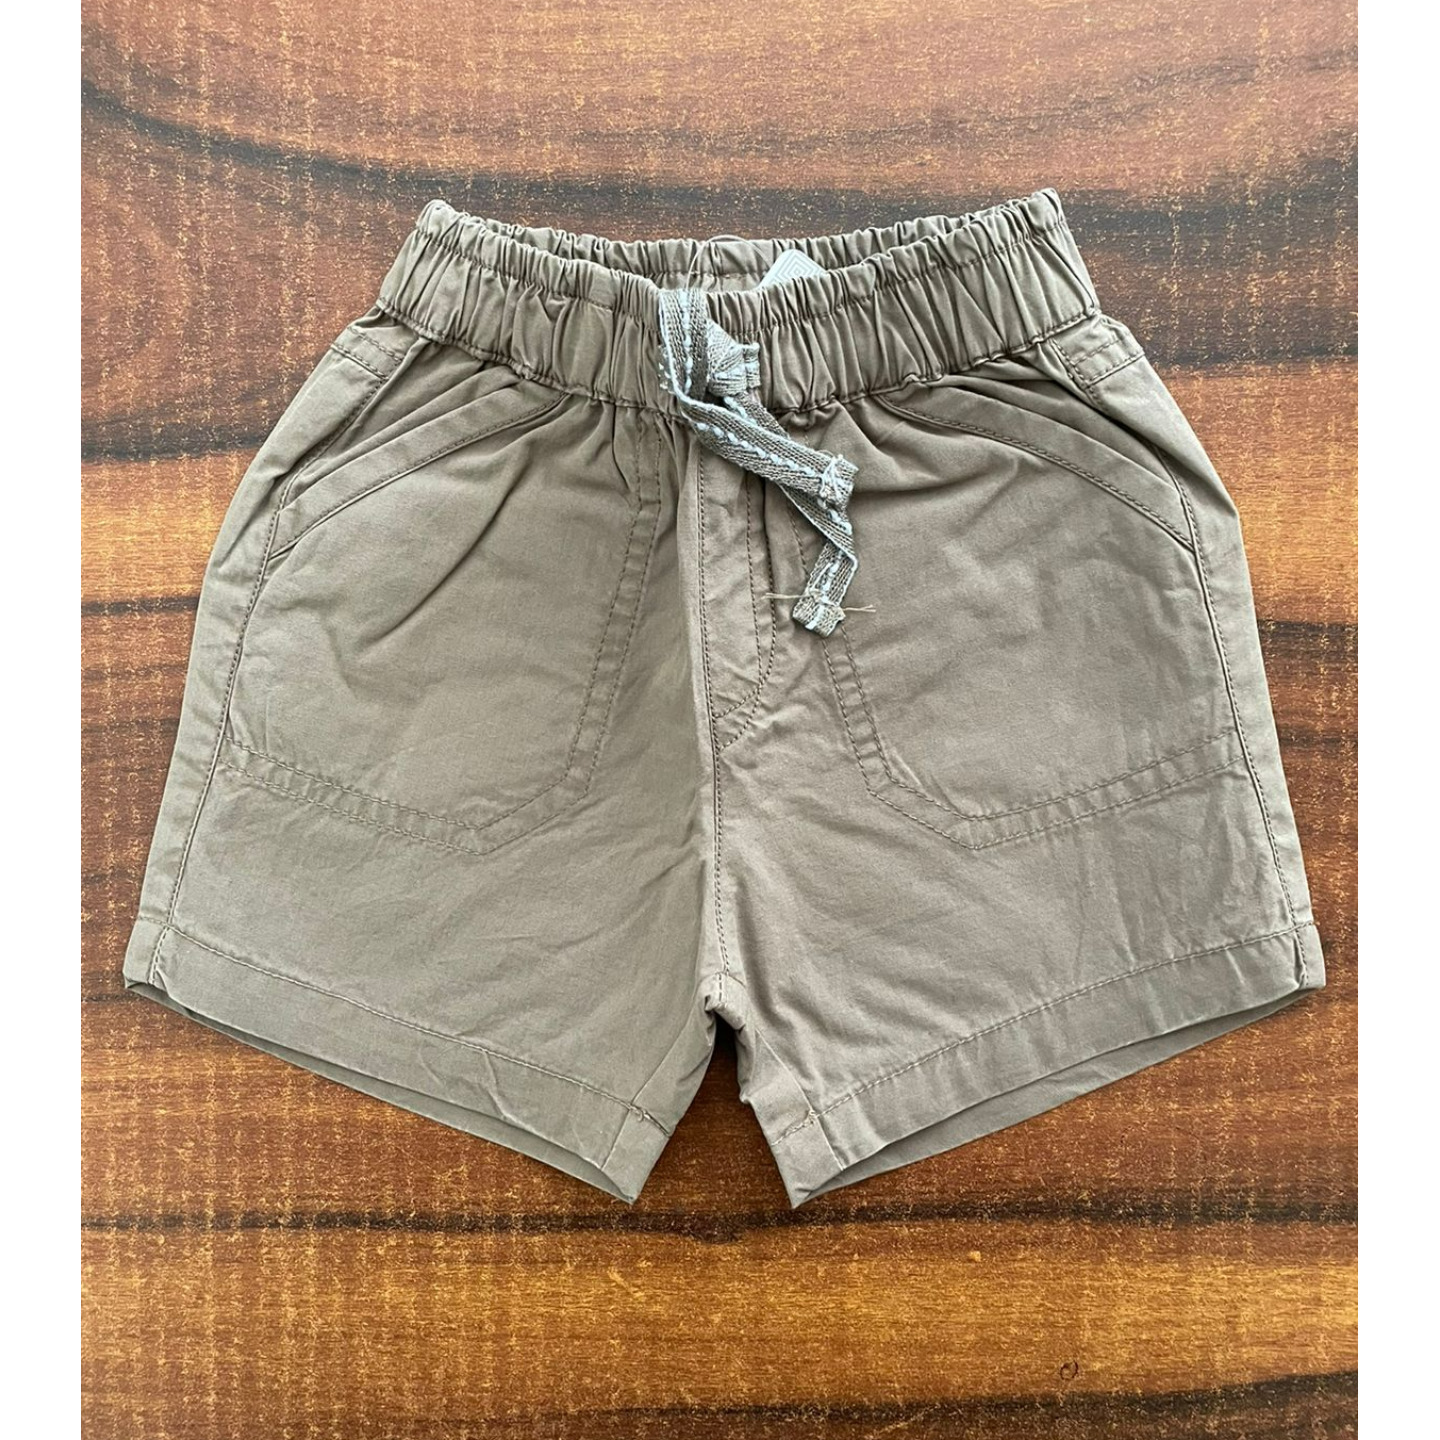 Cucumber NikarShorts Rs 220 Only Made In India Small Size 0 to 6 Months